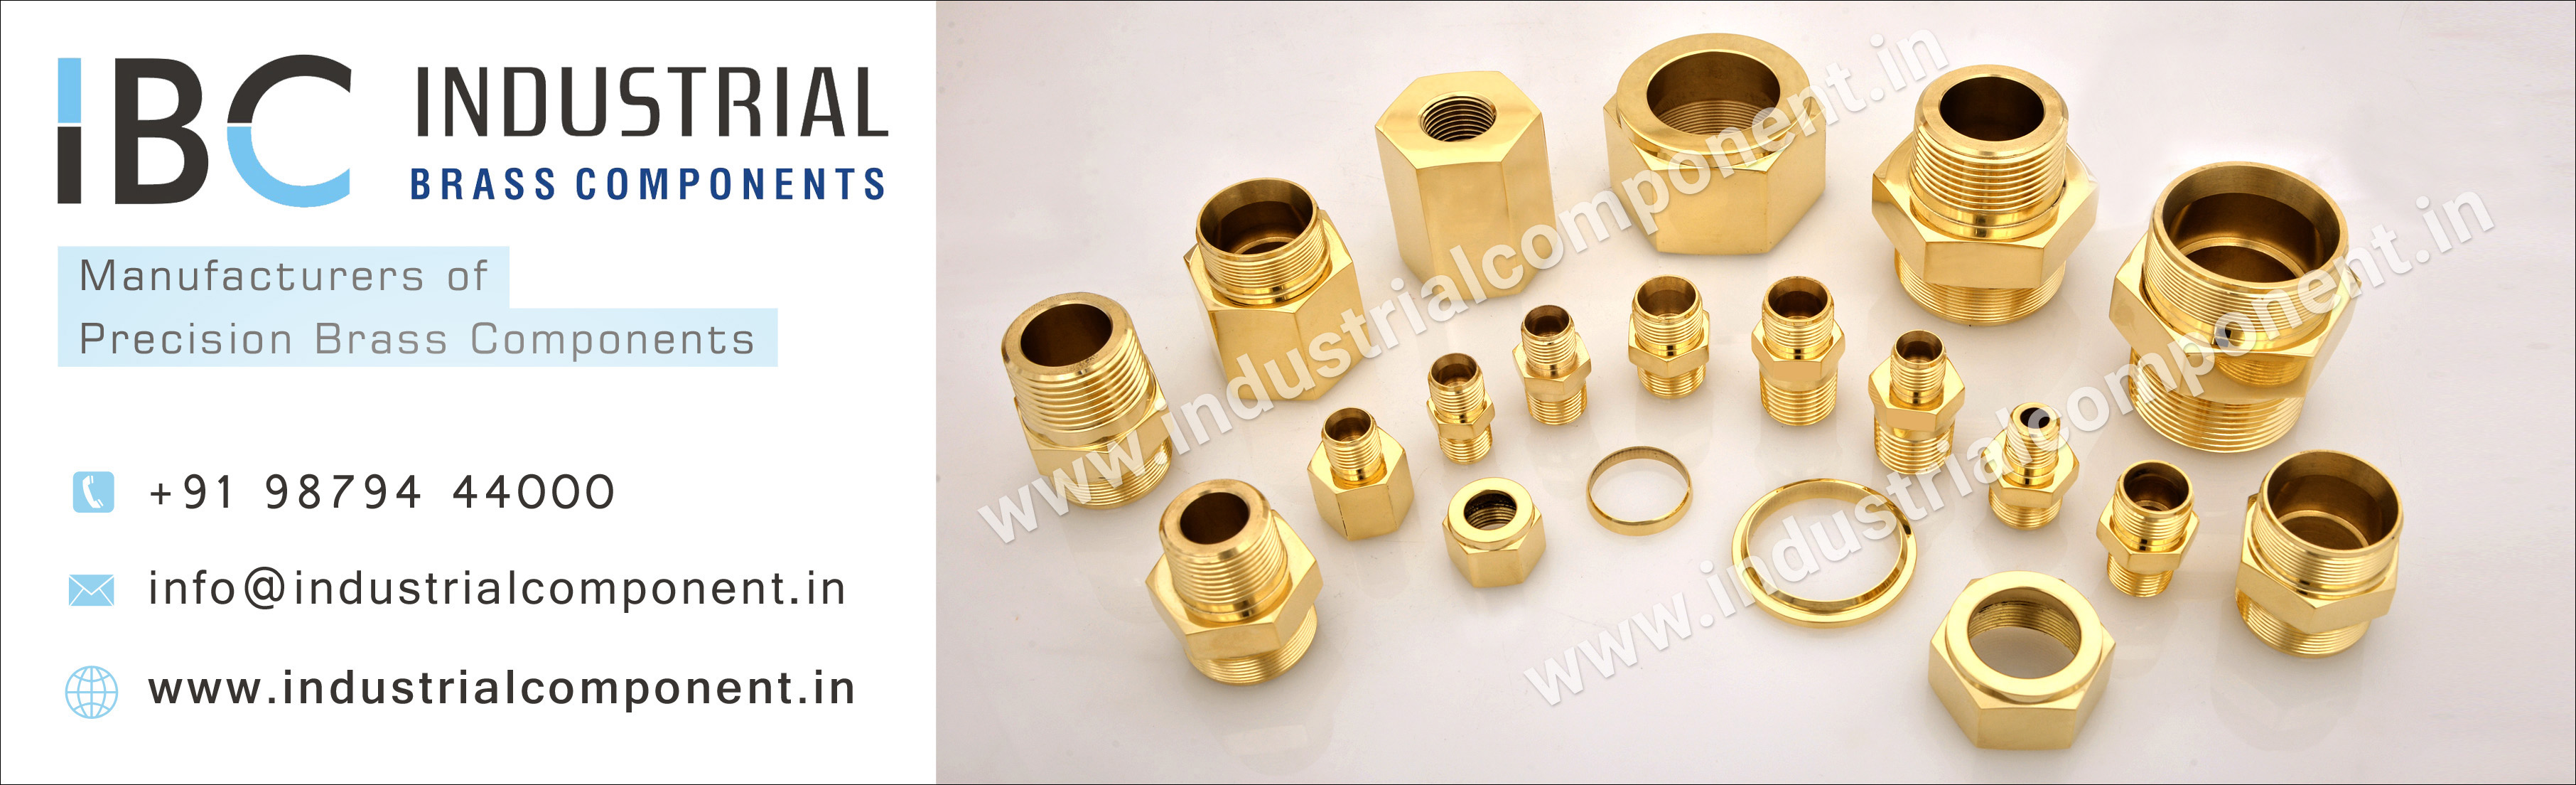 brass fittings, brass compression fittings, brass flare fittings, brass  pipe fittings, brass sanitary fittings, brass fittings manufacturers, brass  fittings exporters, brass fittings suppliers, brass fittings india, brass  fittings jamnagar, brass